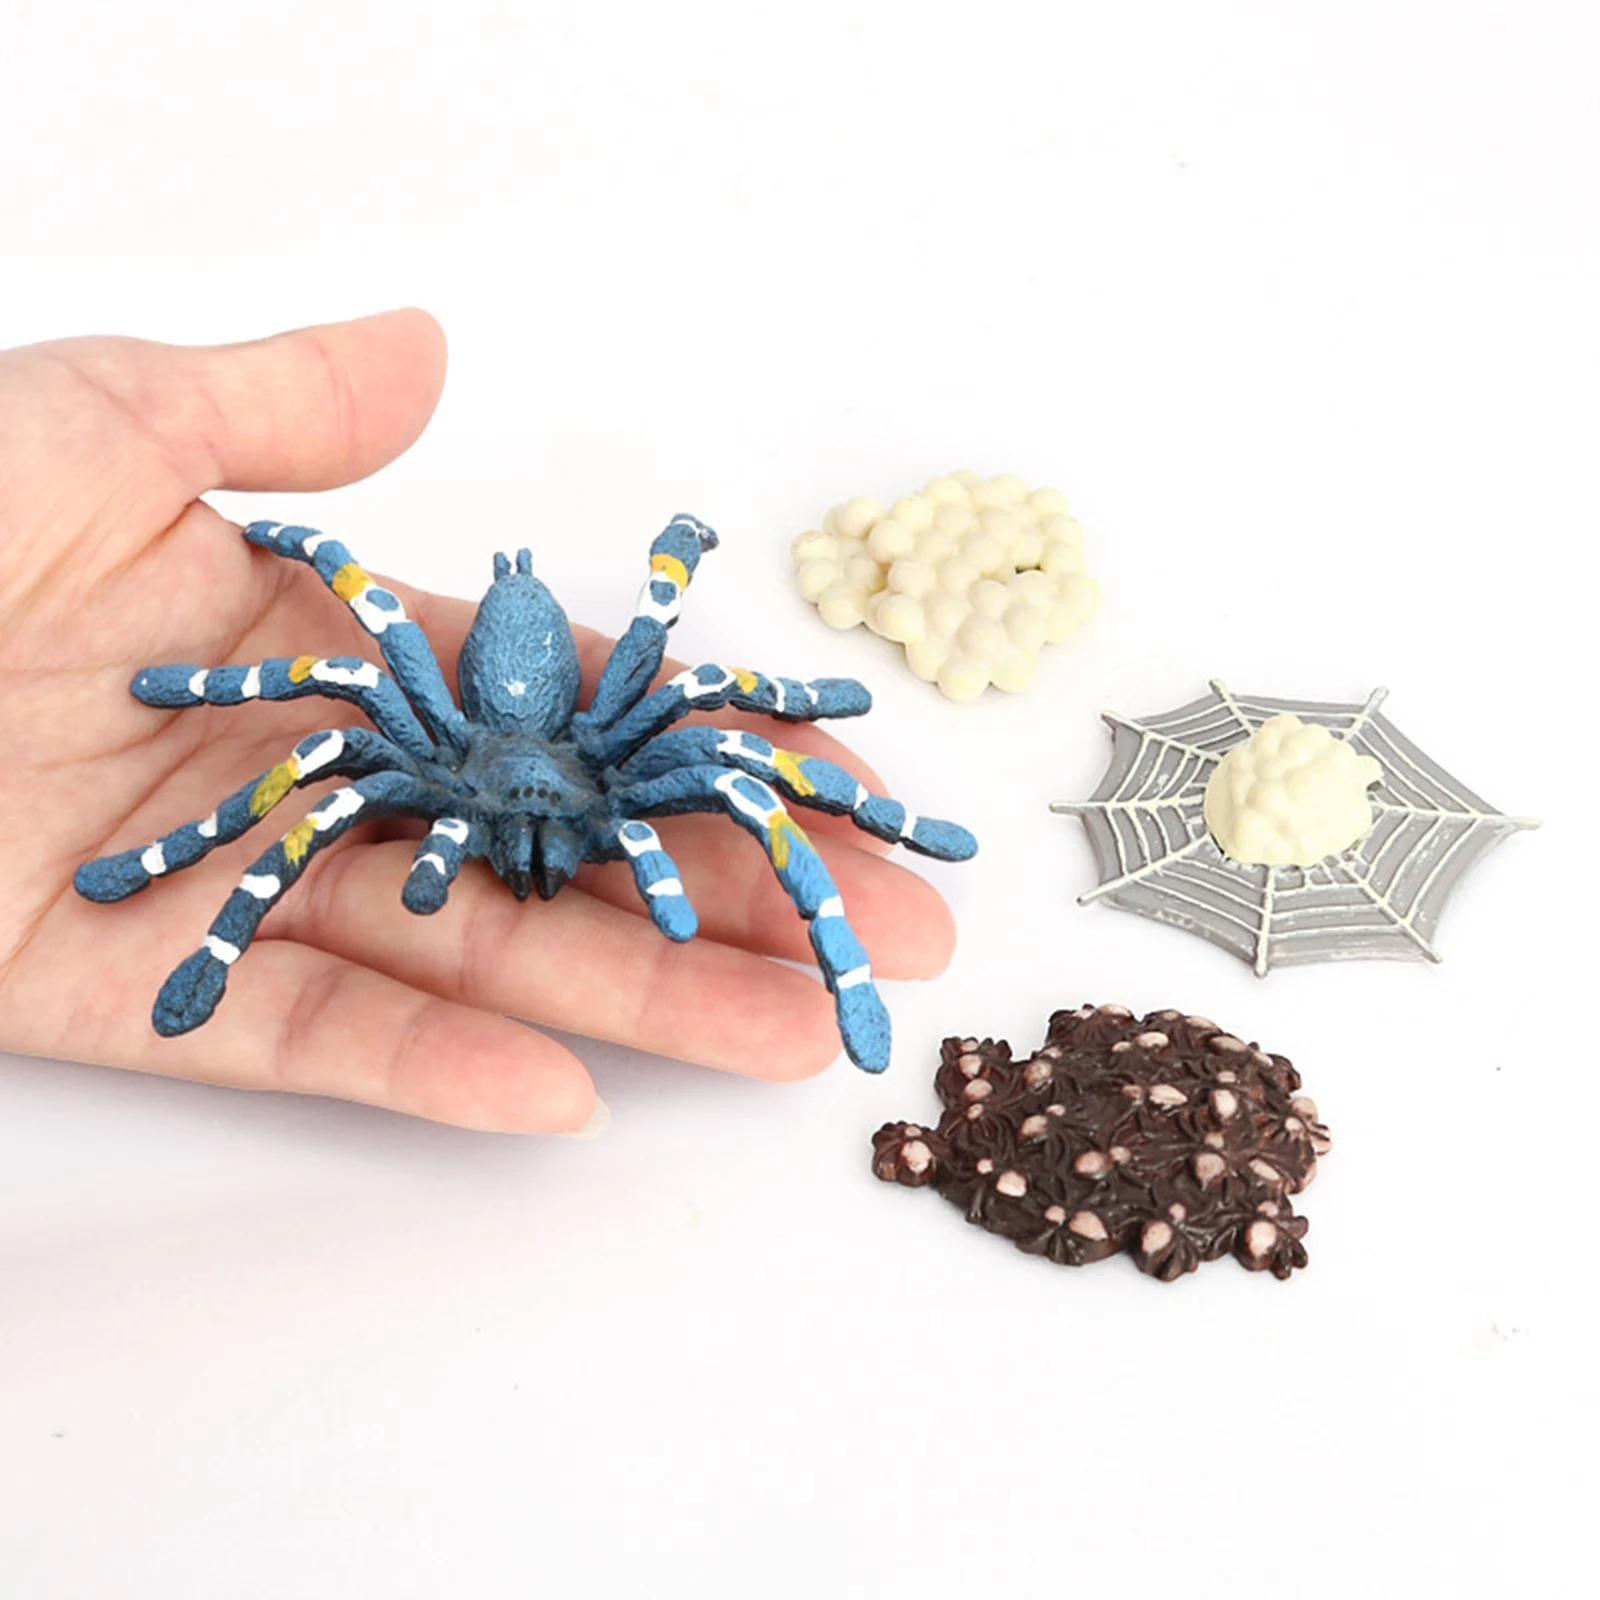 4Pcs Assorted Plastic Insects Bird Eating Spider Model Kids Educational Toy Blue